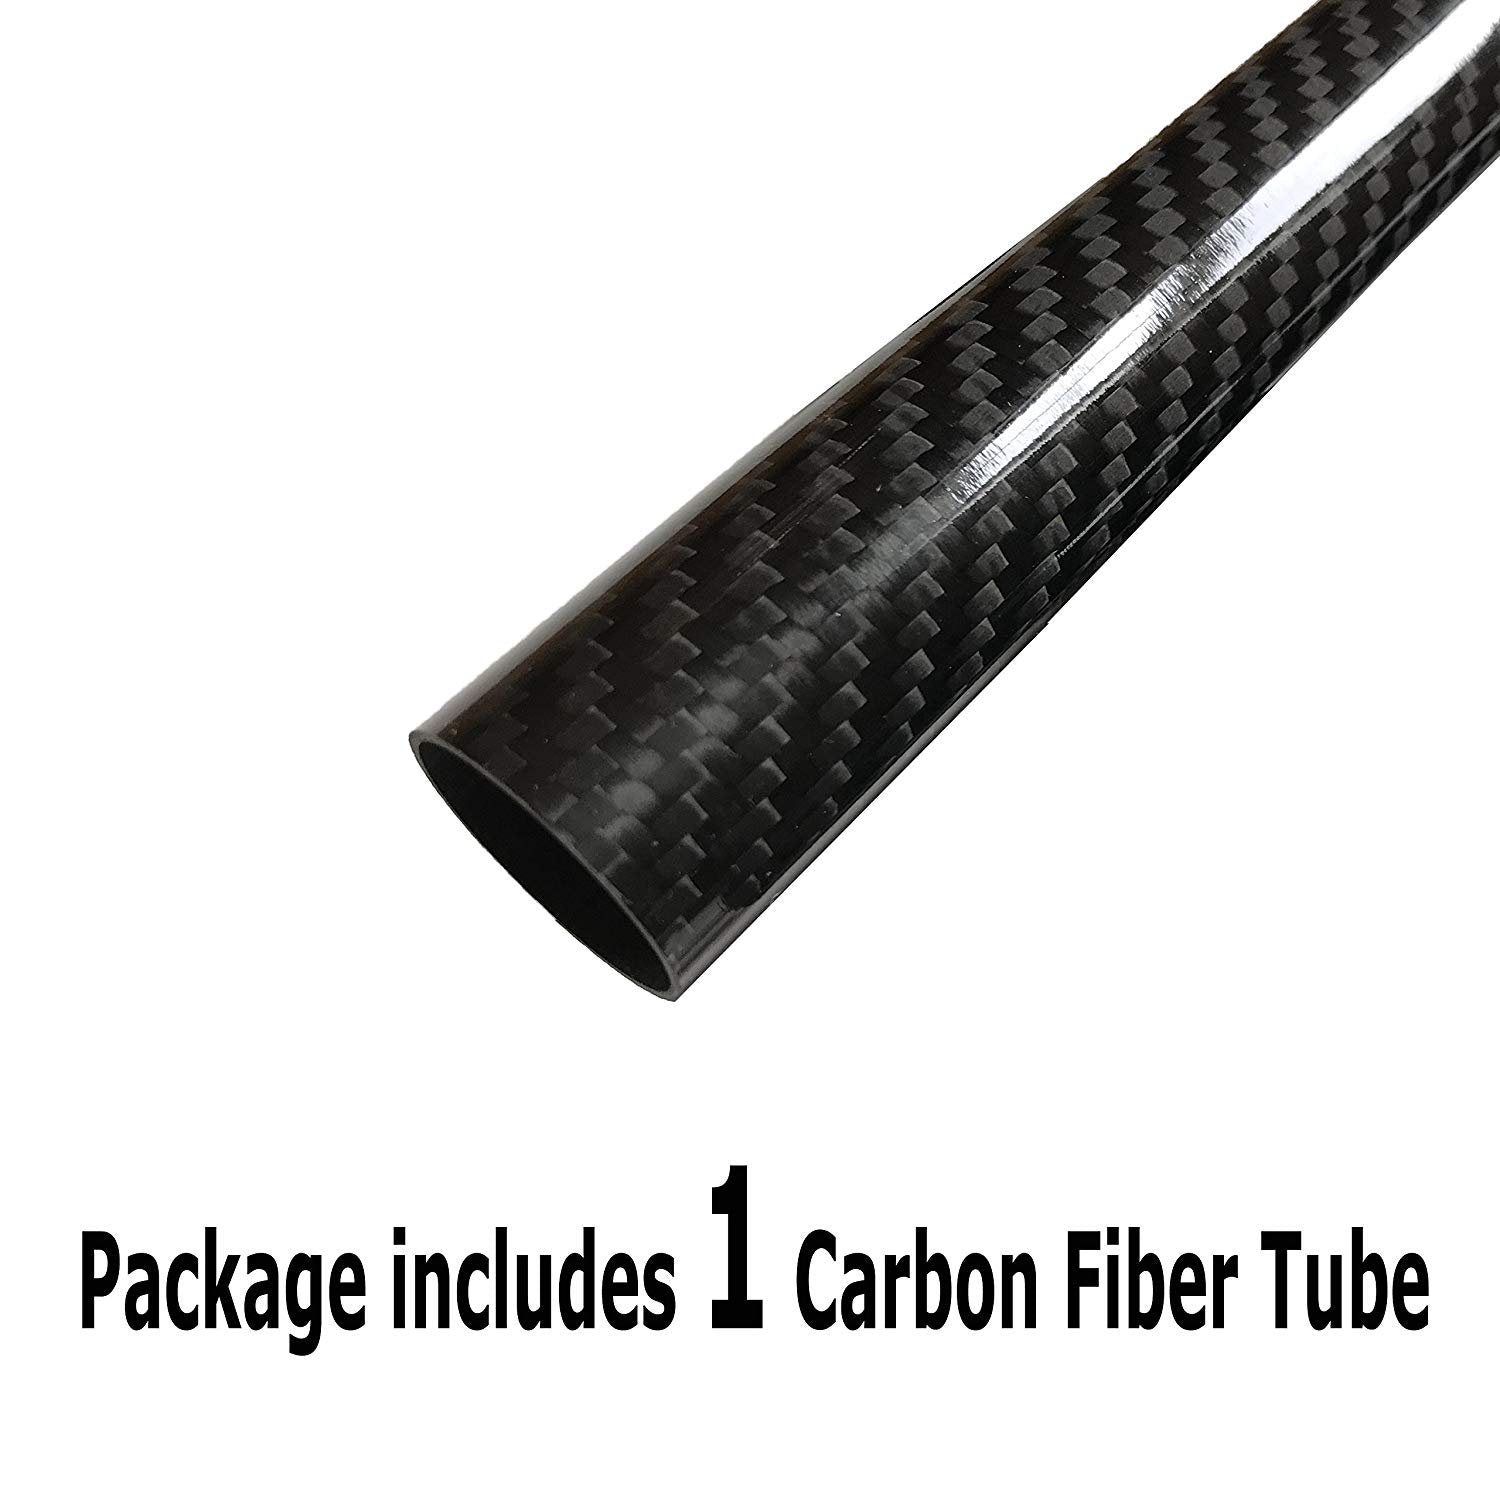 Carbon Fiber Tube - 25mm x 23mm x 500mm - 3K Roll Wrapped 100% Carbon Fiber Tube Glossy Surface 1